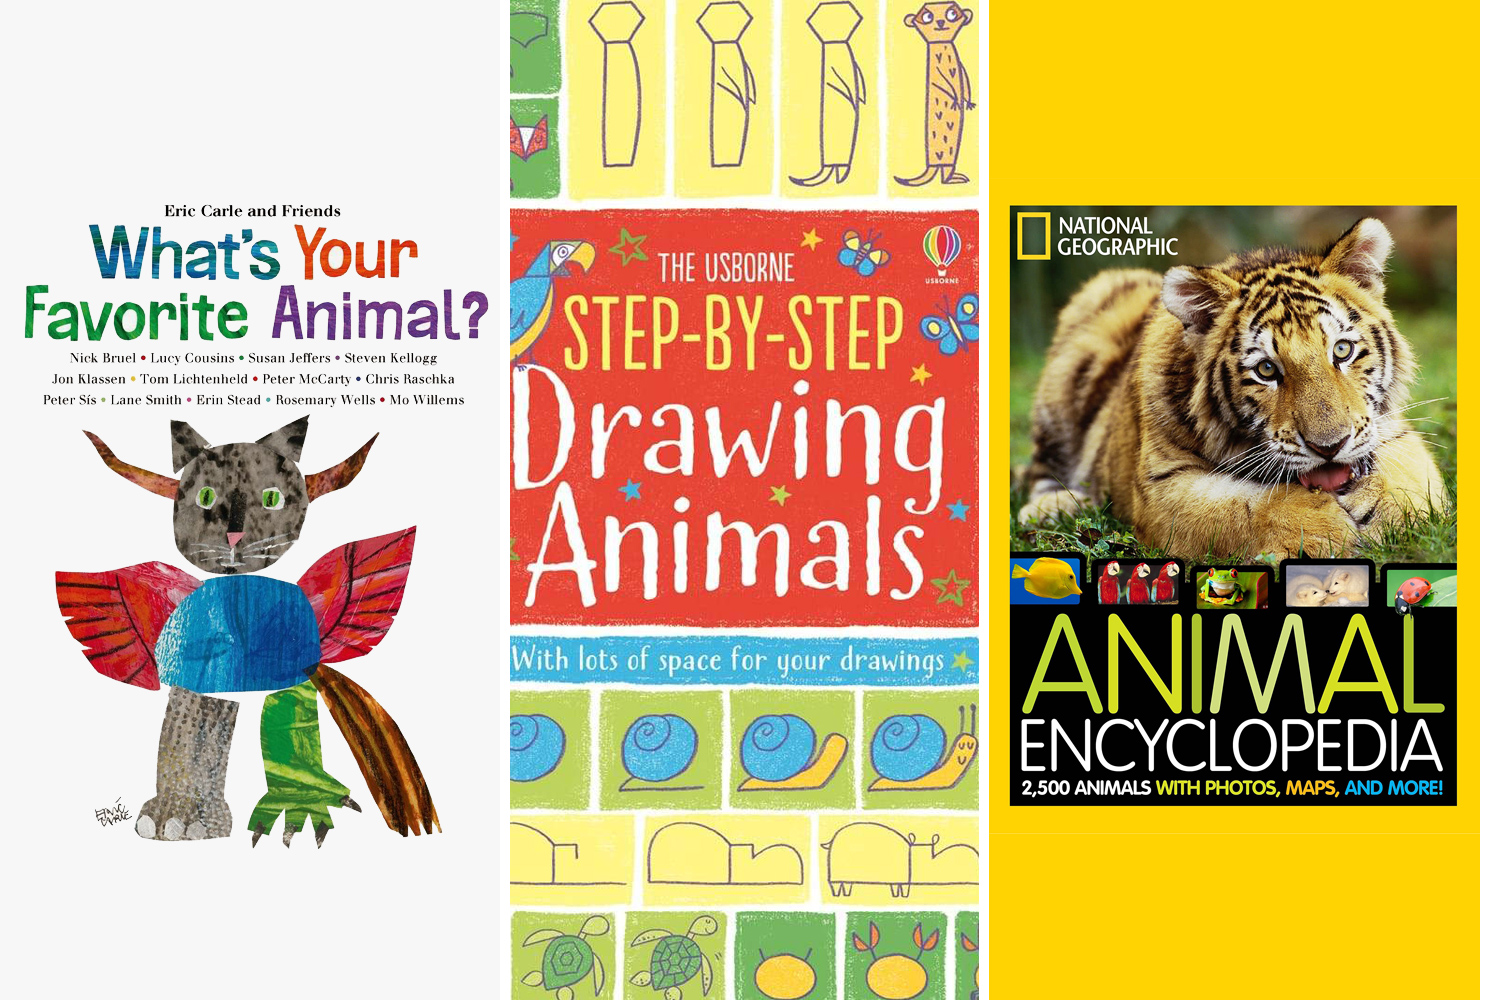 Three fab books for the kids to read | Time Out Dubai